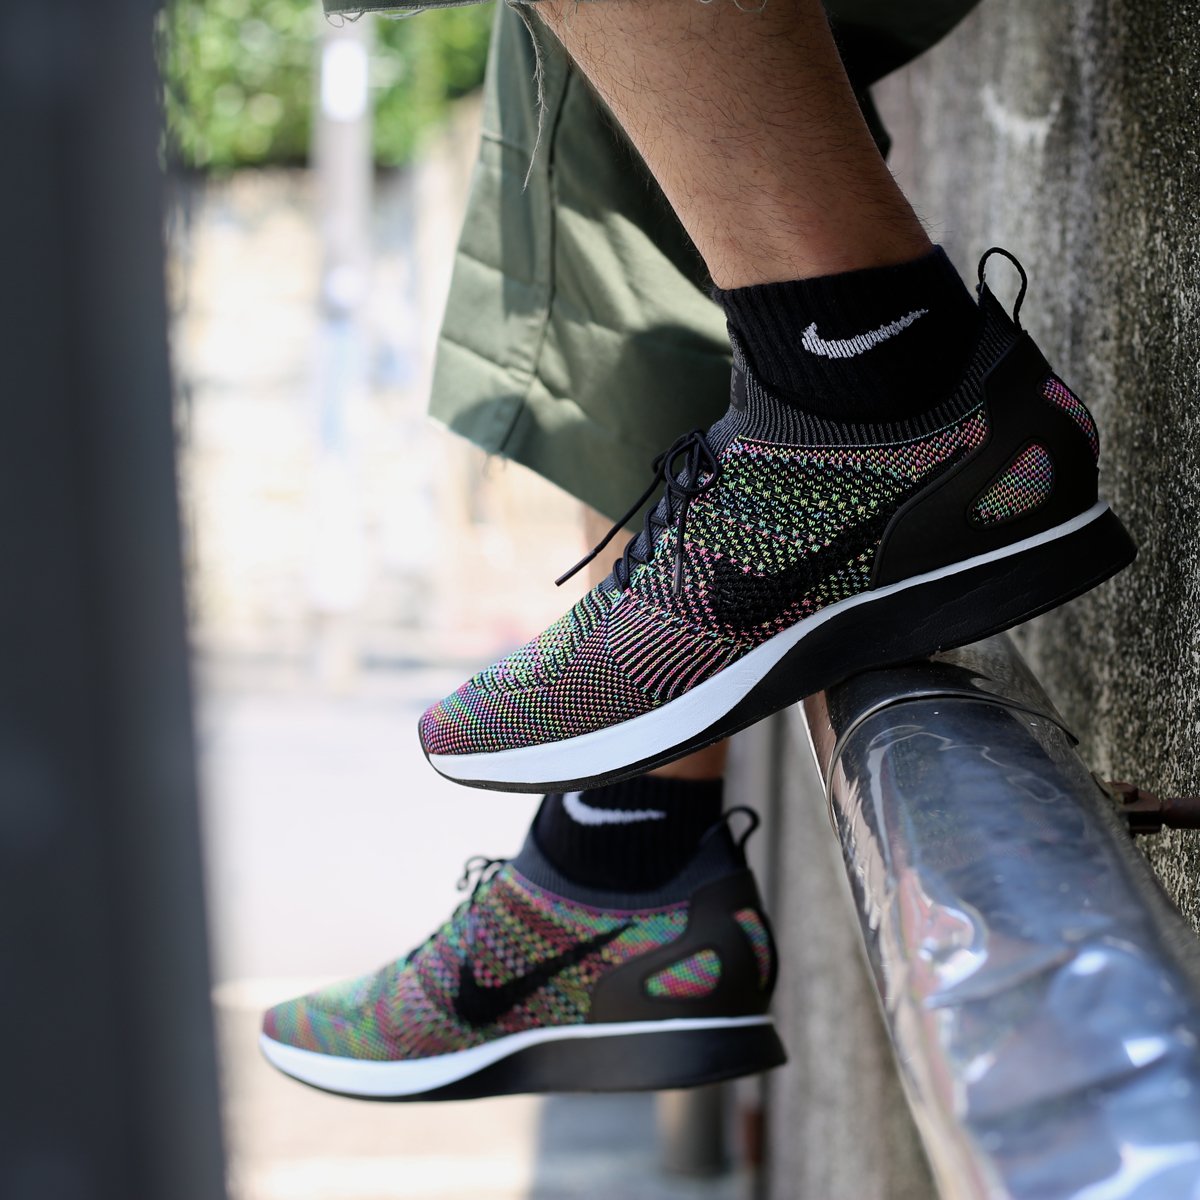 Dwell elefant antenne atmos on Twitter: "IN STORE NOW NIKE AIR ZOOM MARIAH FLYKNIT RACER  918264-101(atmos/Sports Lab by atmos/NIKE直営only) https://t.co/RRQIZQOGRW" /  Twitter